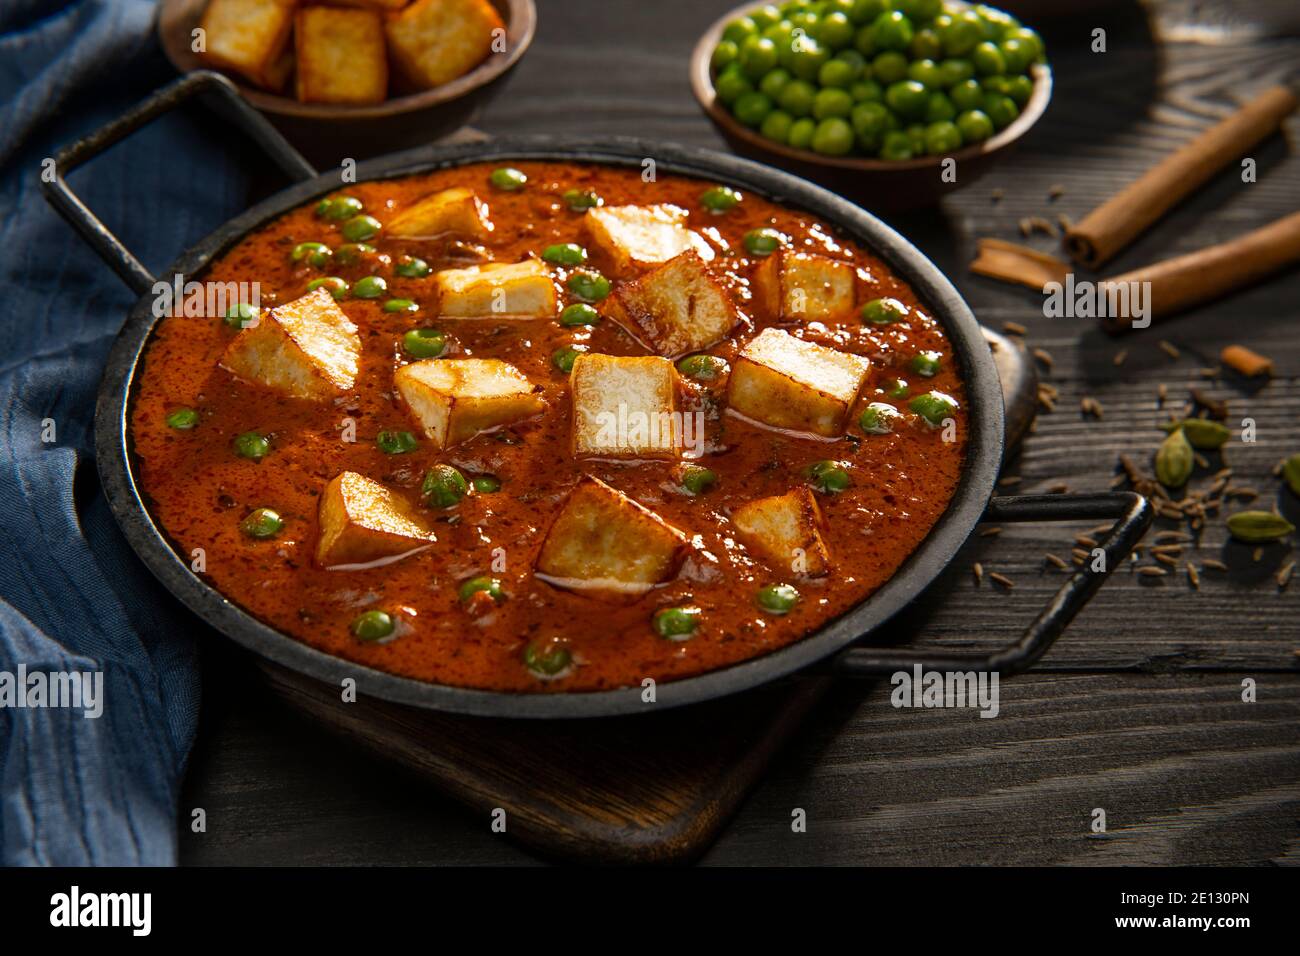 Mattar Paneer or cottage cheese with Peas. A vegetarian Indian delicacy, with raw peas and fried paneer (cottage cheese) in the background. Stock Photo